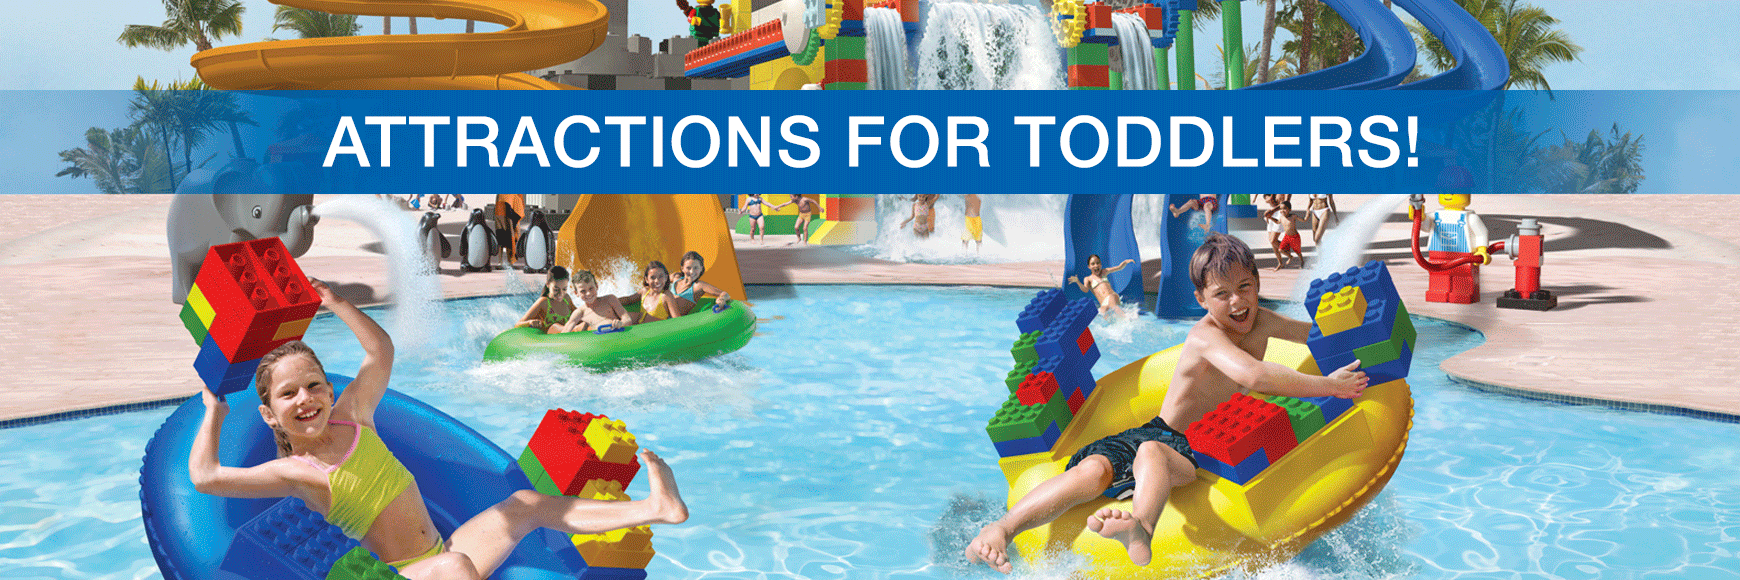 9 Orlando attractions for toddlers - Orlando Vacation